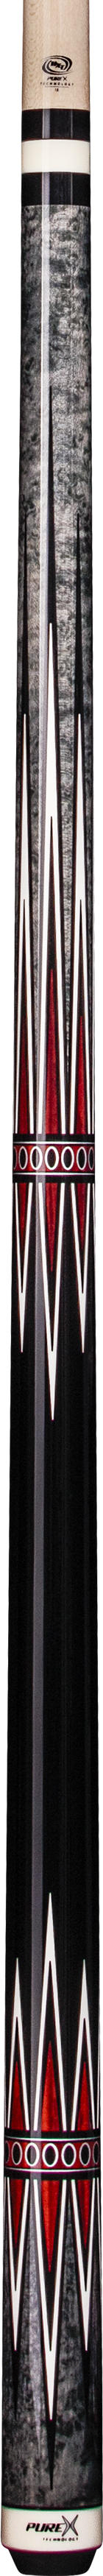 Players HXT-67 Pool Cue